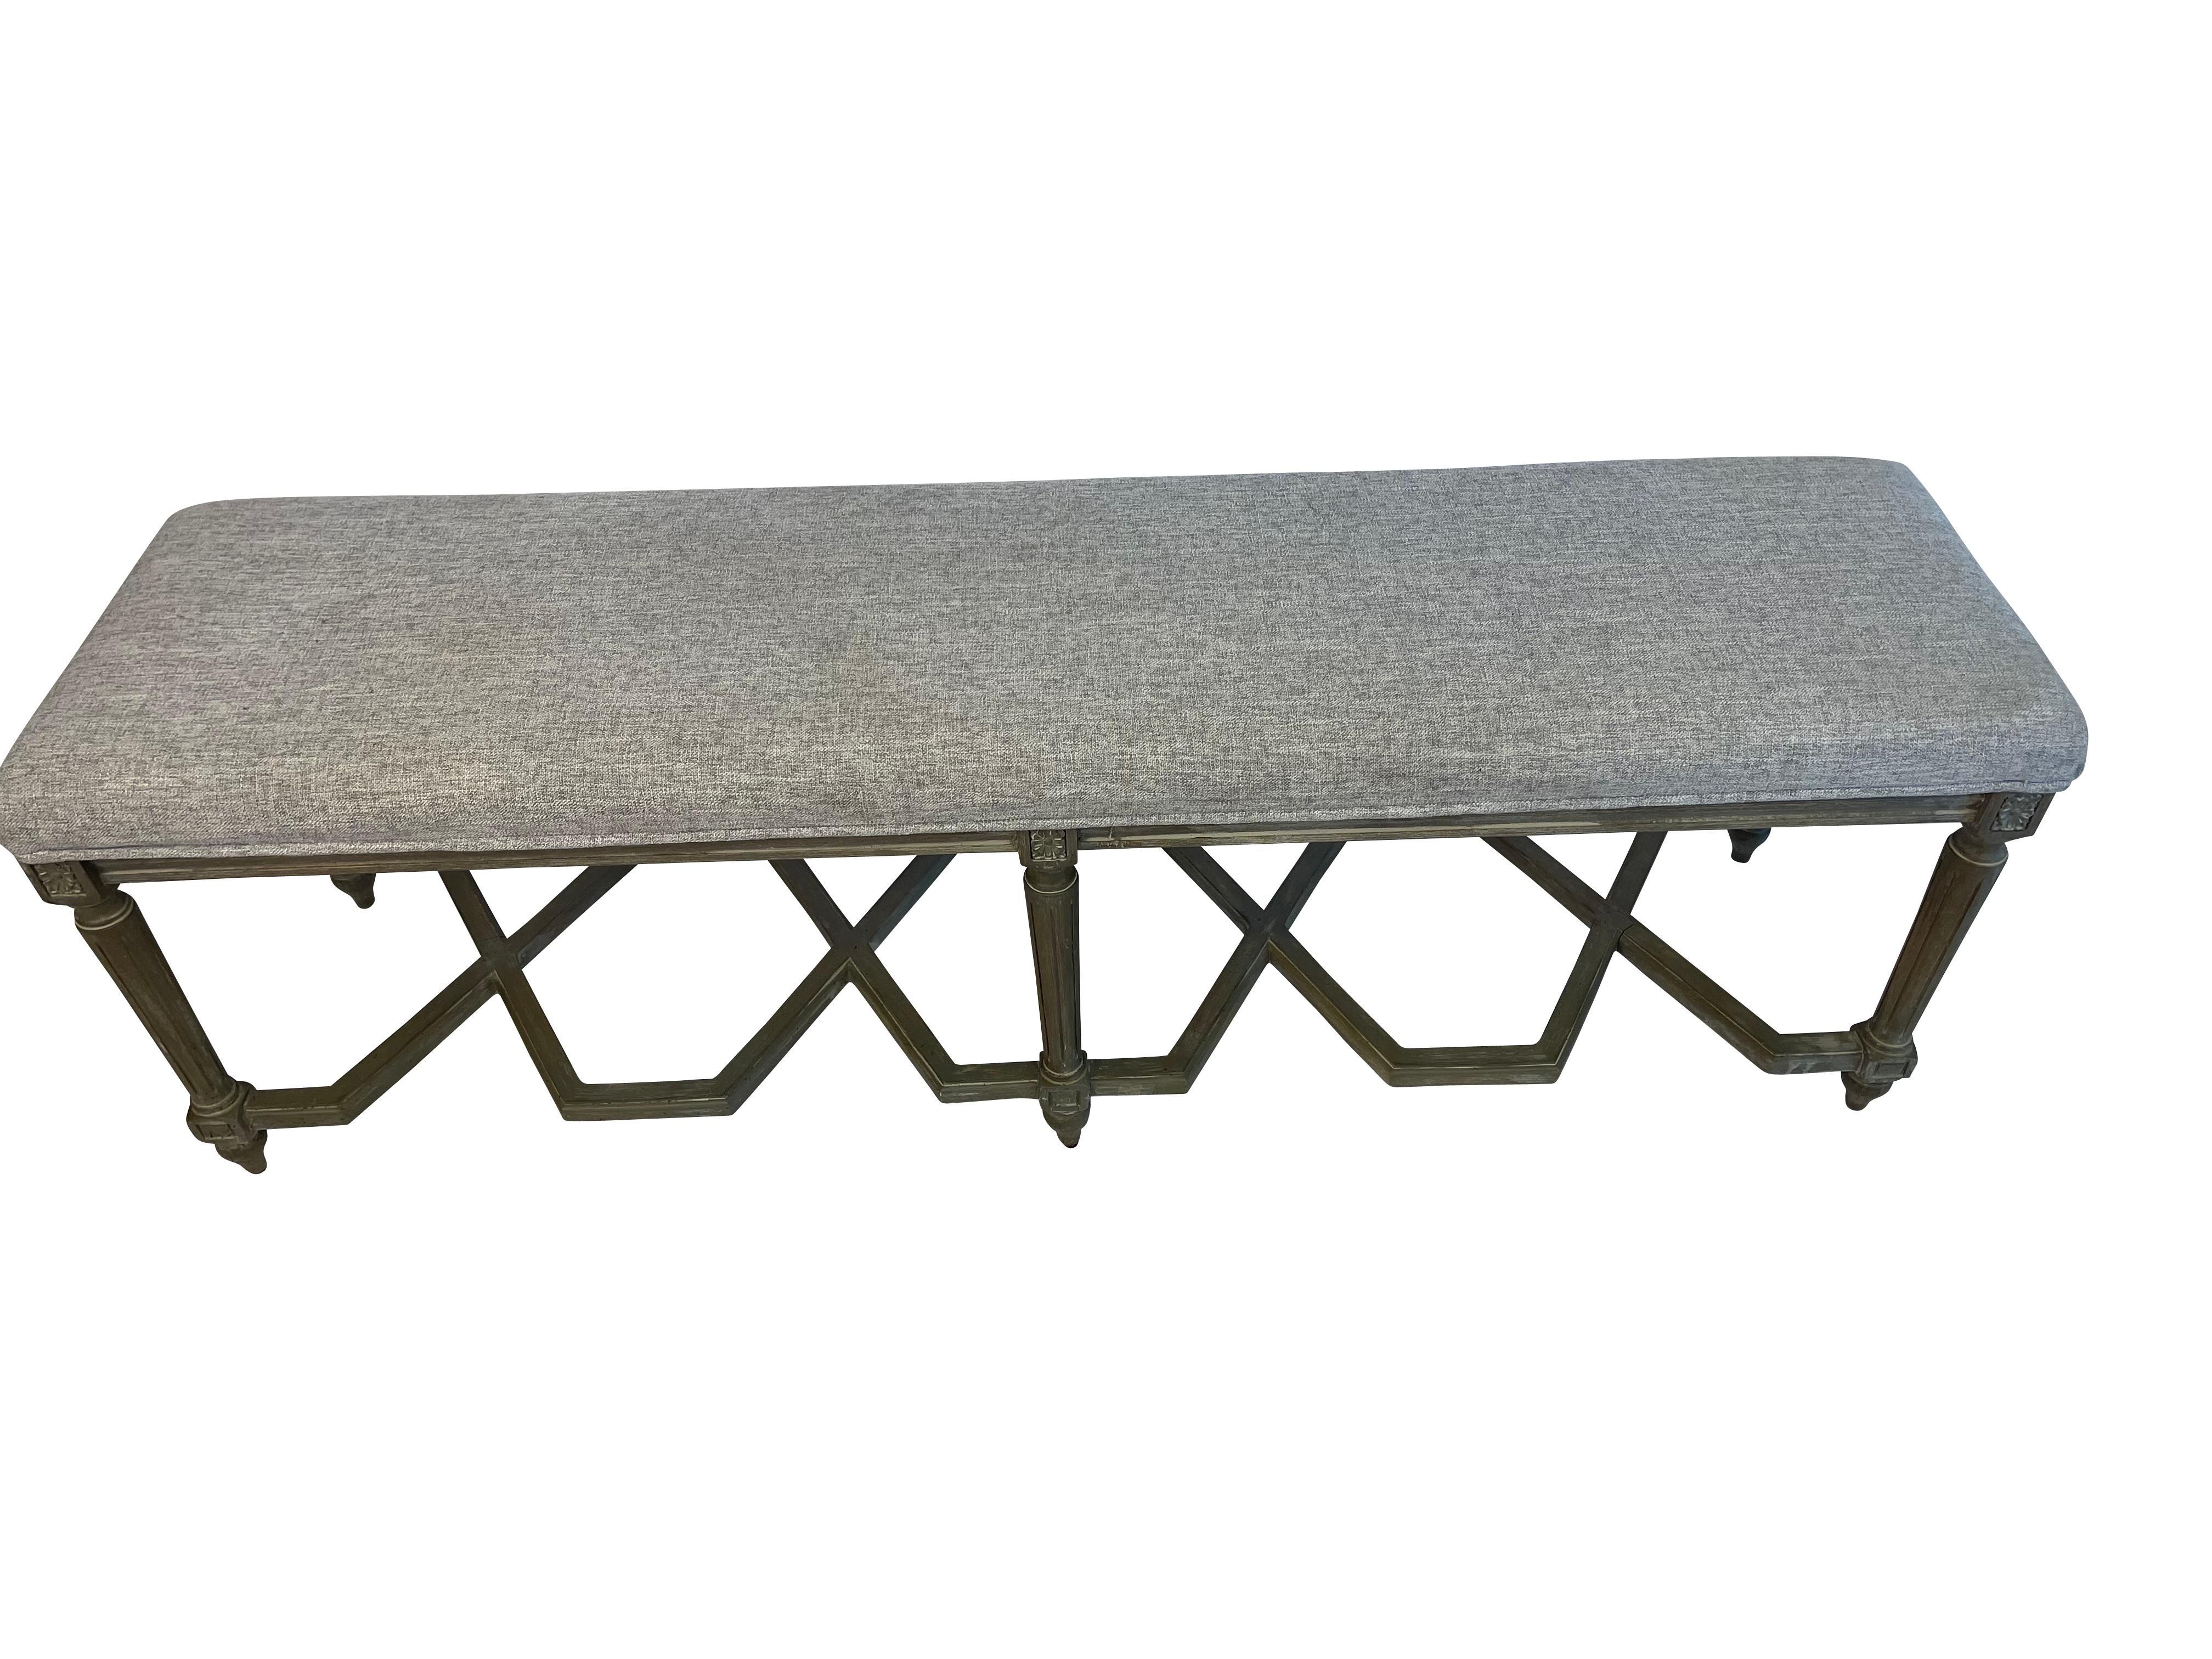 Attractive updated Louis XVI grey-painted bench with interesting hexagonal crossbar support on the bottom. Painted in a lustrous grey paint and newly professionally upholstered in a durable grey linen look fabric. Reeded legs ending in the typical